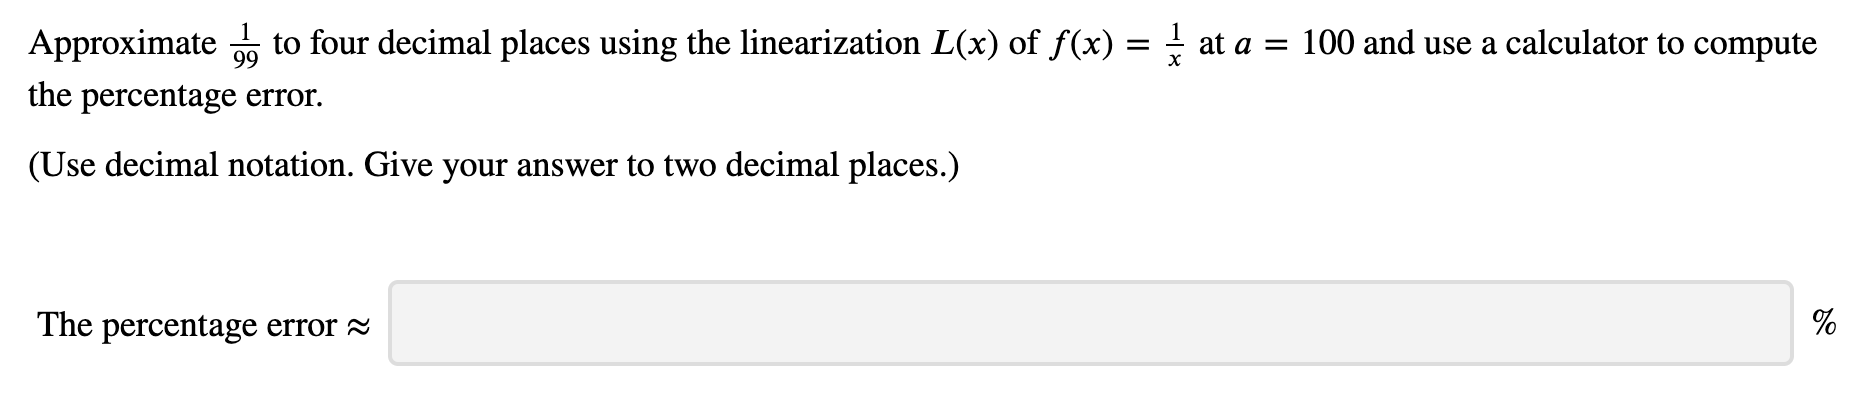 to four decimal places using the linearization L(x) of f(x) = -
100 and use a calculator to compute
Approximate
at a
99
х
the percentage error.
(Use decimal notation. Give your answer to two decimal places.)
The percentage error
